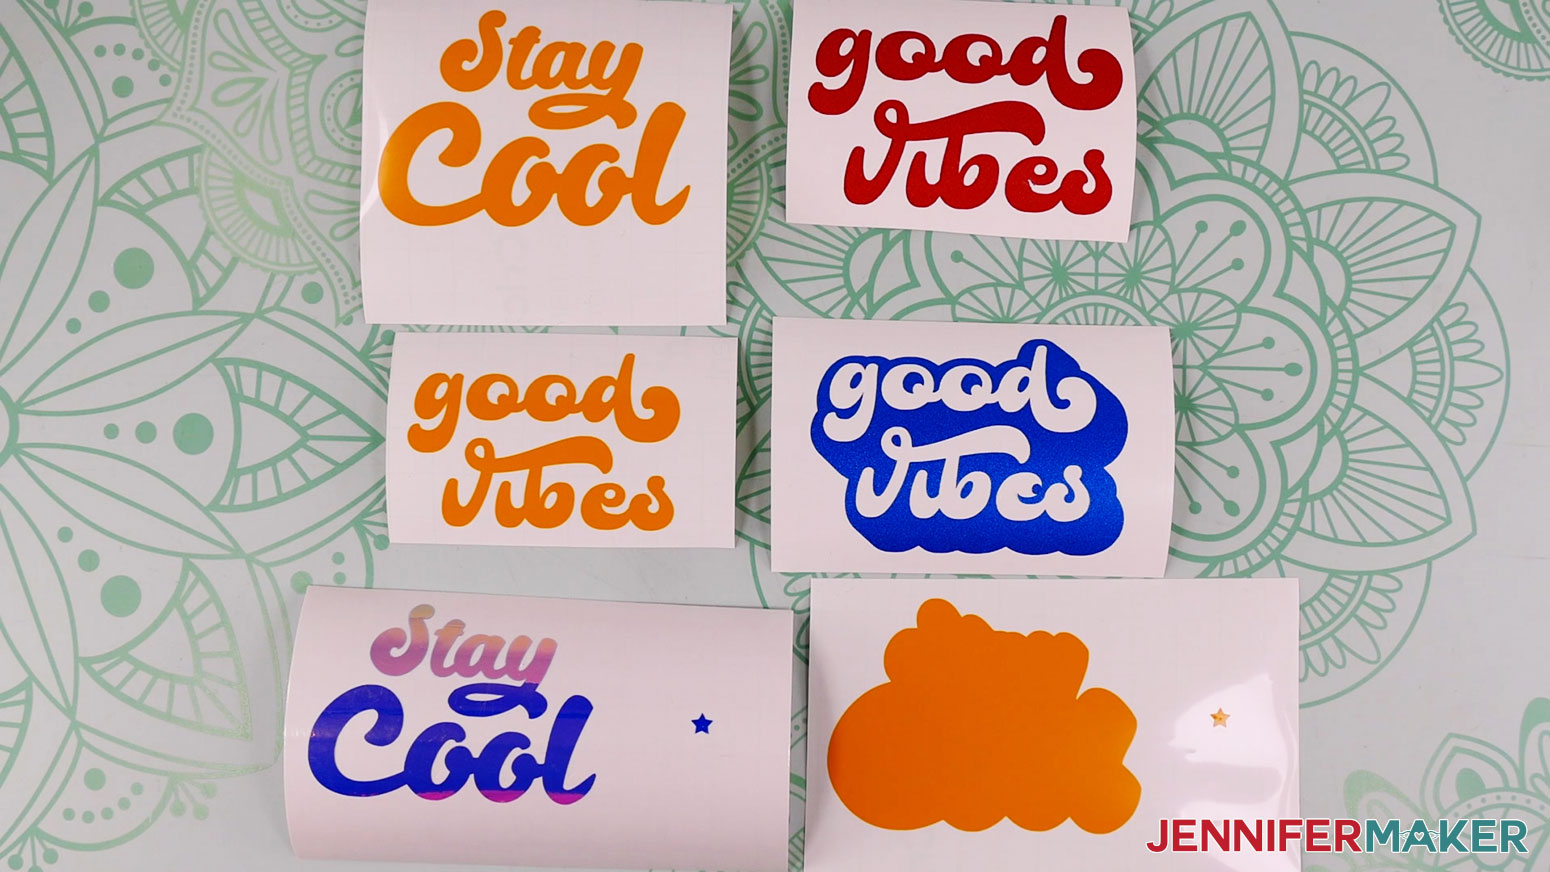 how to use transfer tape stay cool and good vibes fully weeded